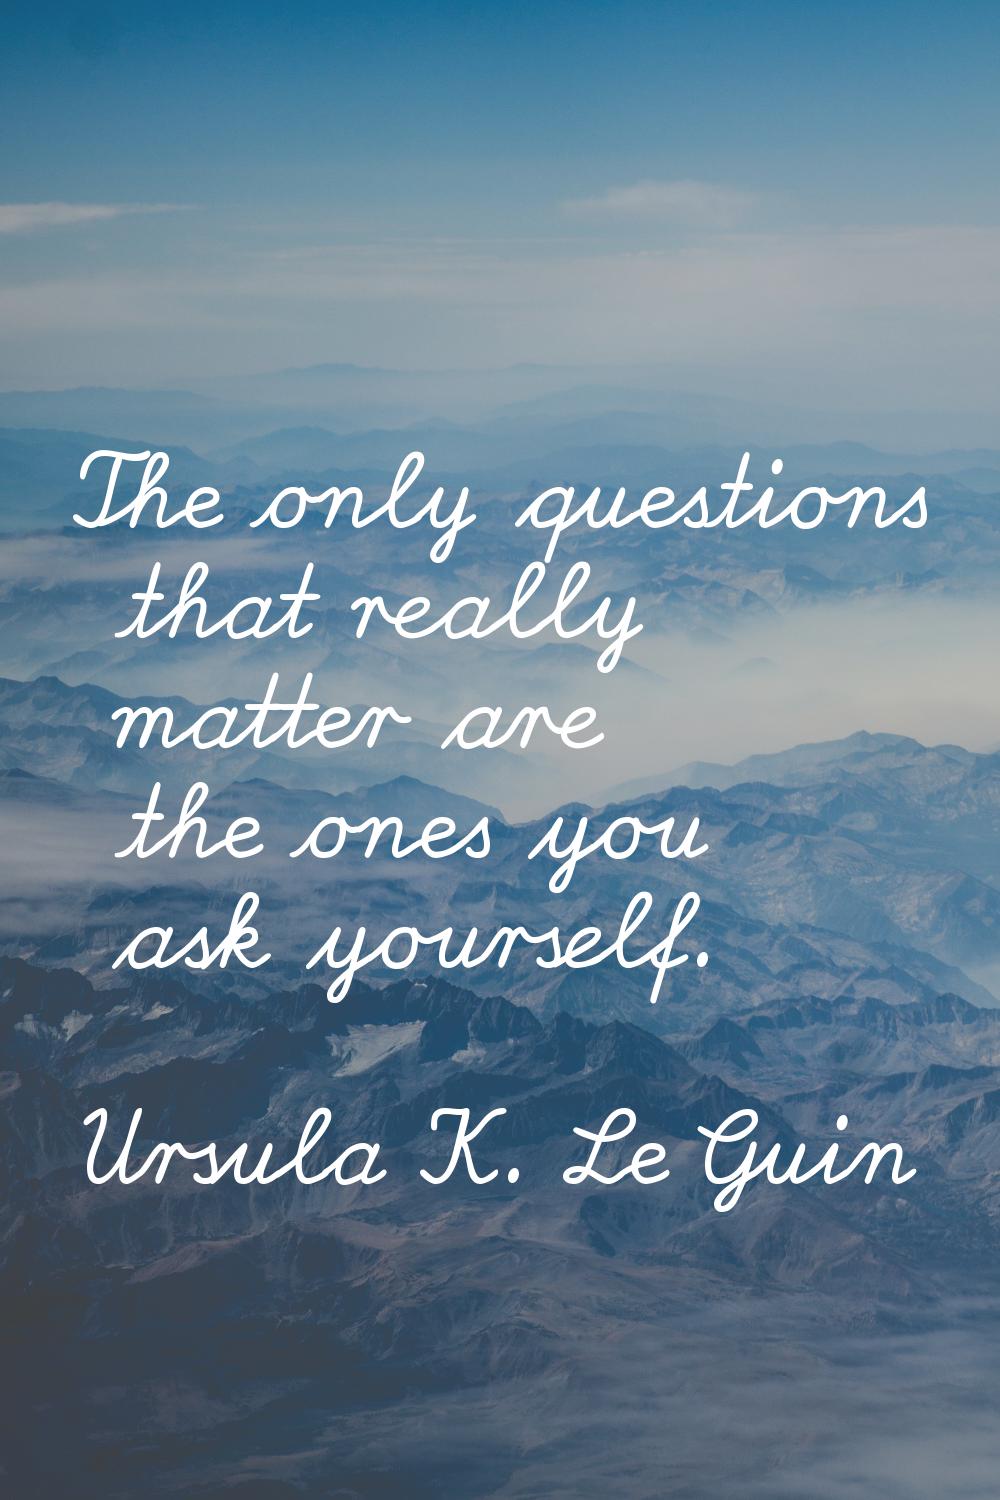 The only questions that really matter are the ones you ask yourself.